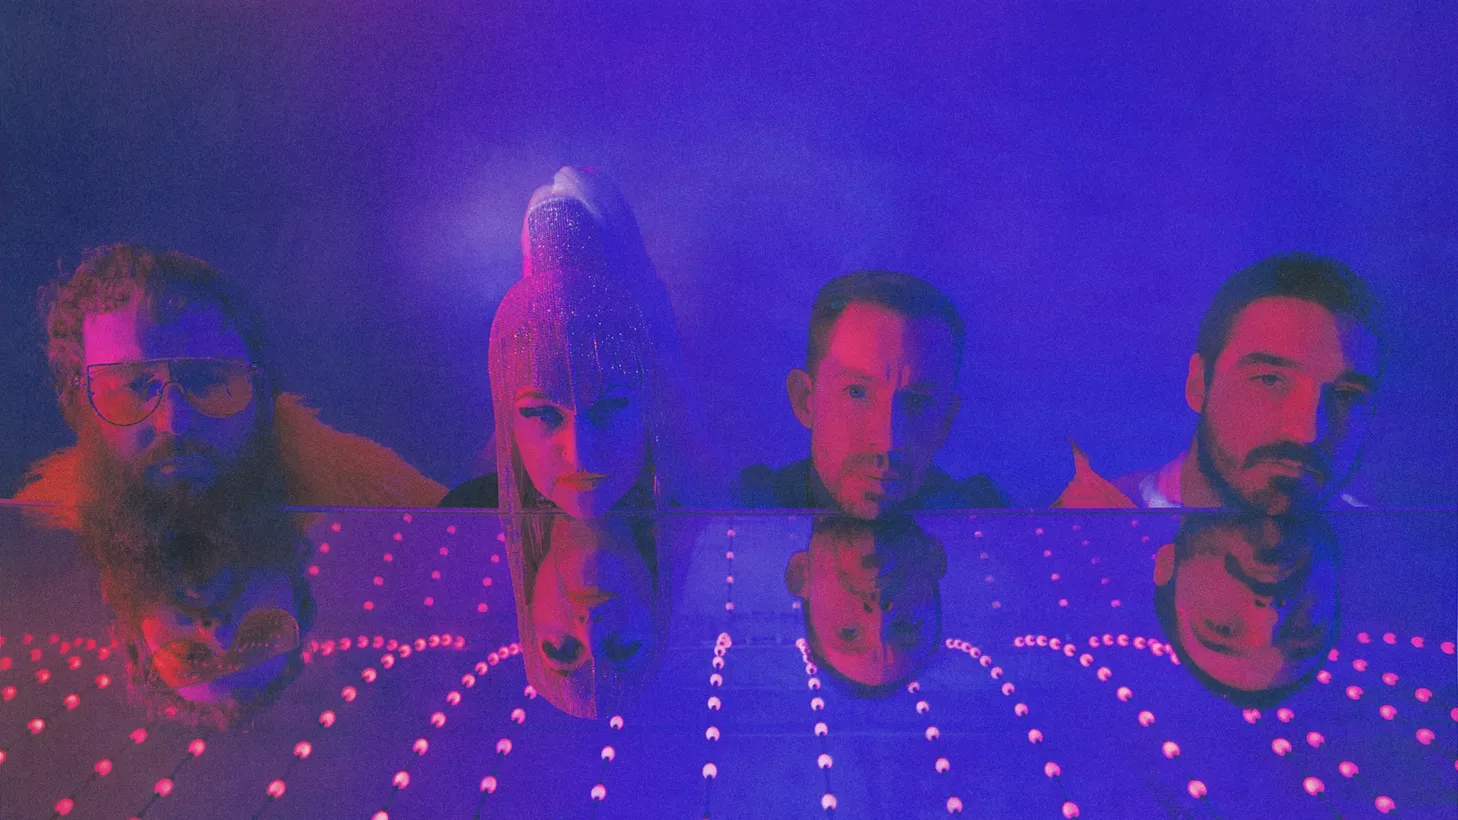 The mighty sound of Hiatus Kaiyote gets funked up by an extraordinary Georgia Anne Muldrow remix of “Get Sun,” a delicious slice from their forthcoming “Mood Variant” remix album due out in April.